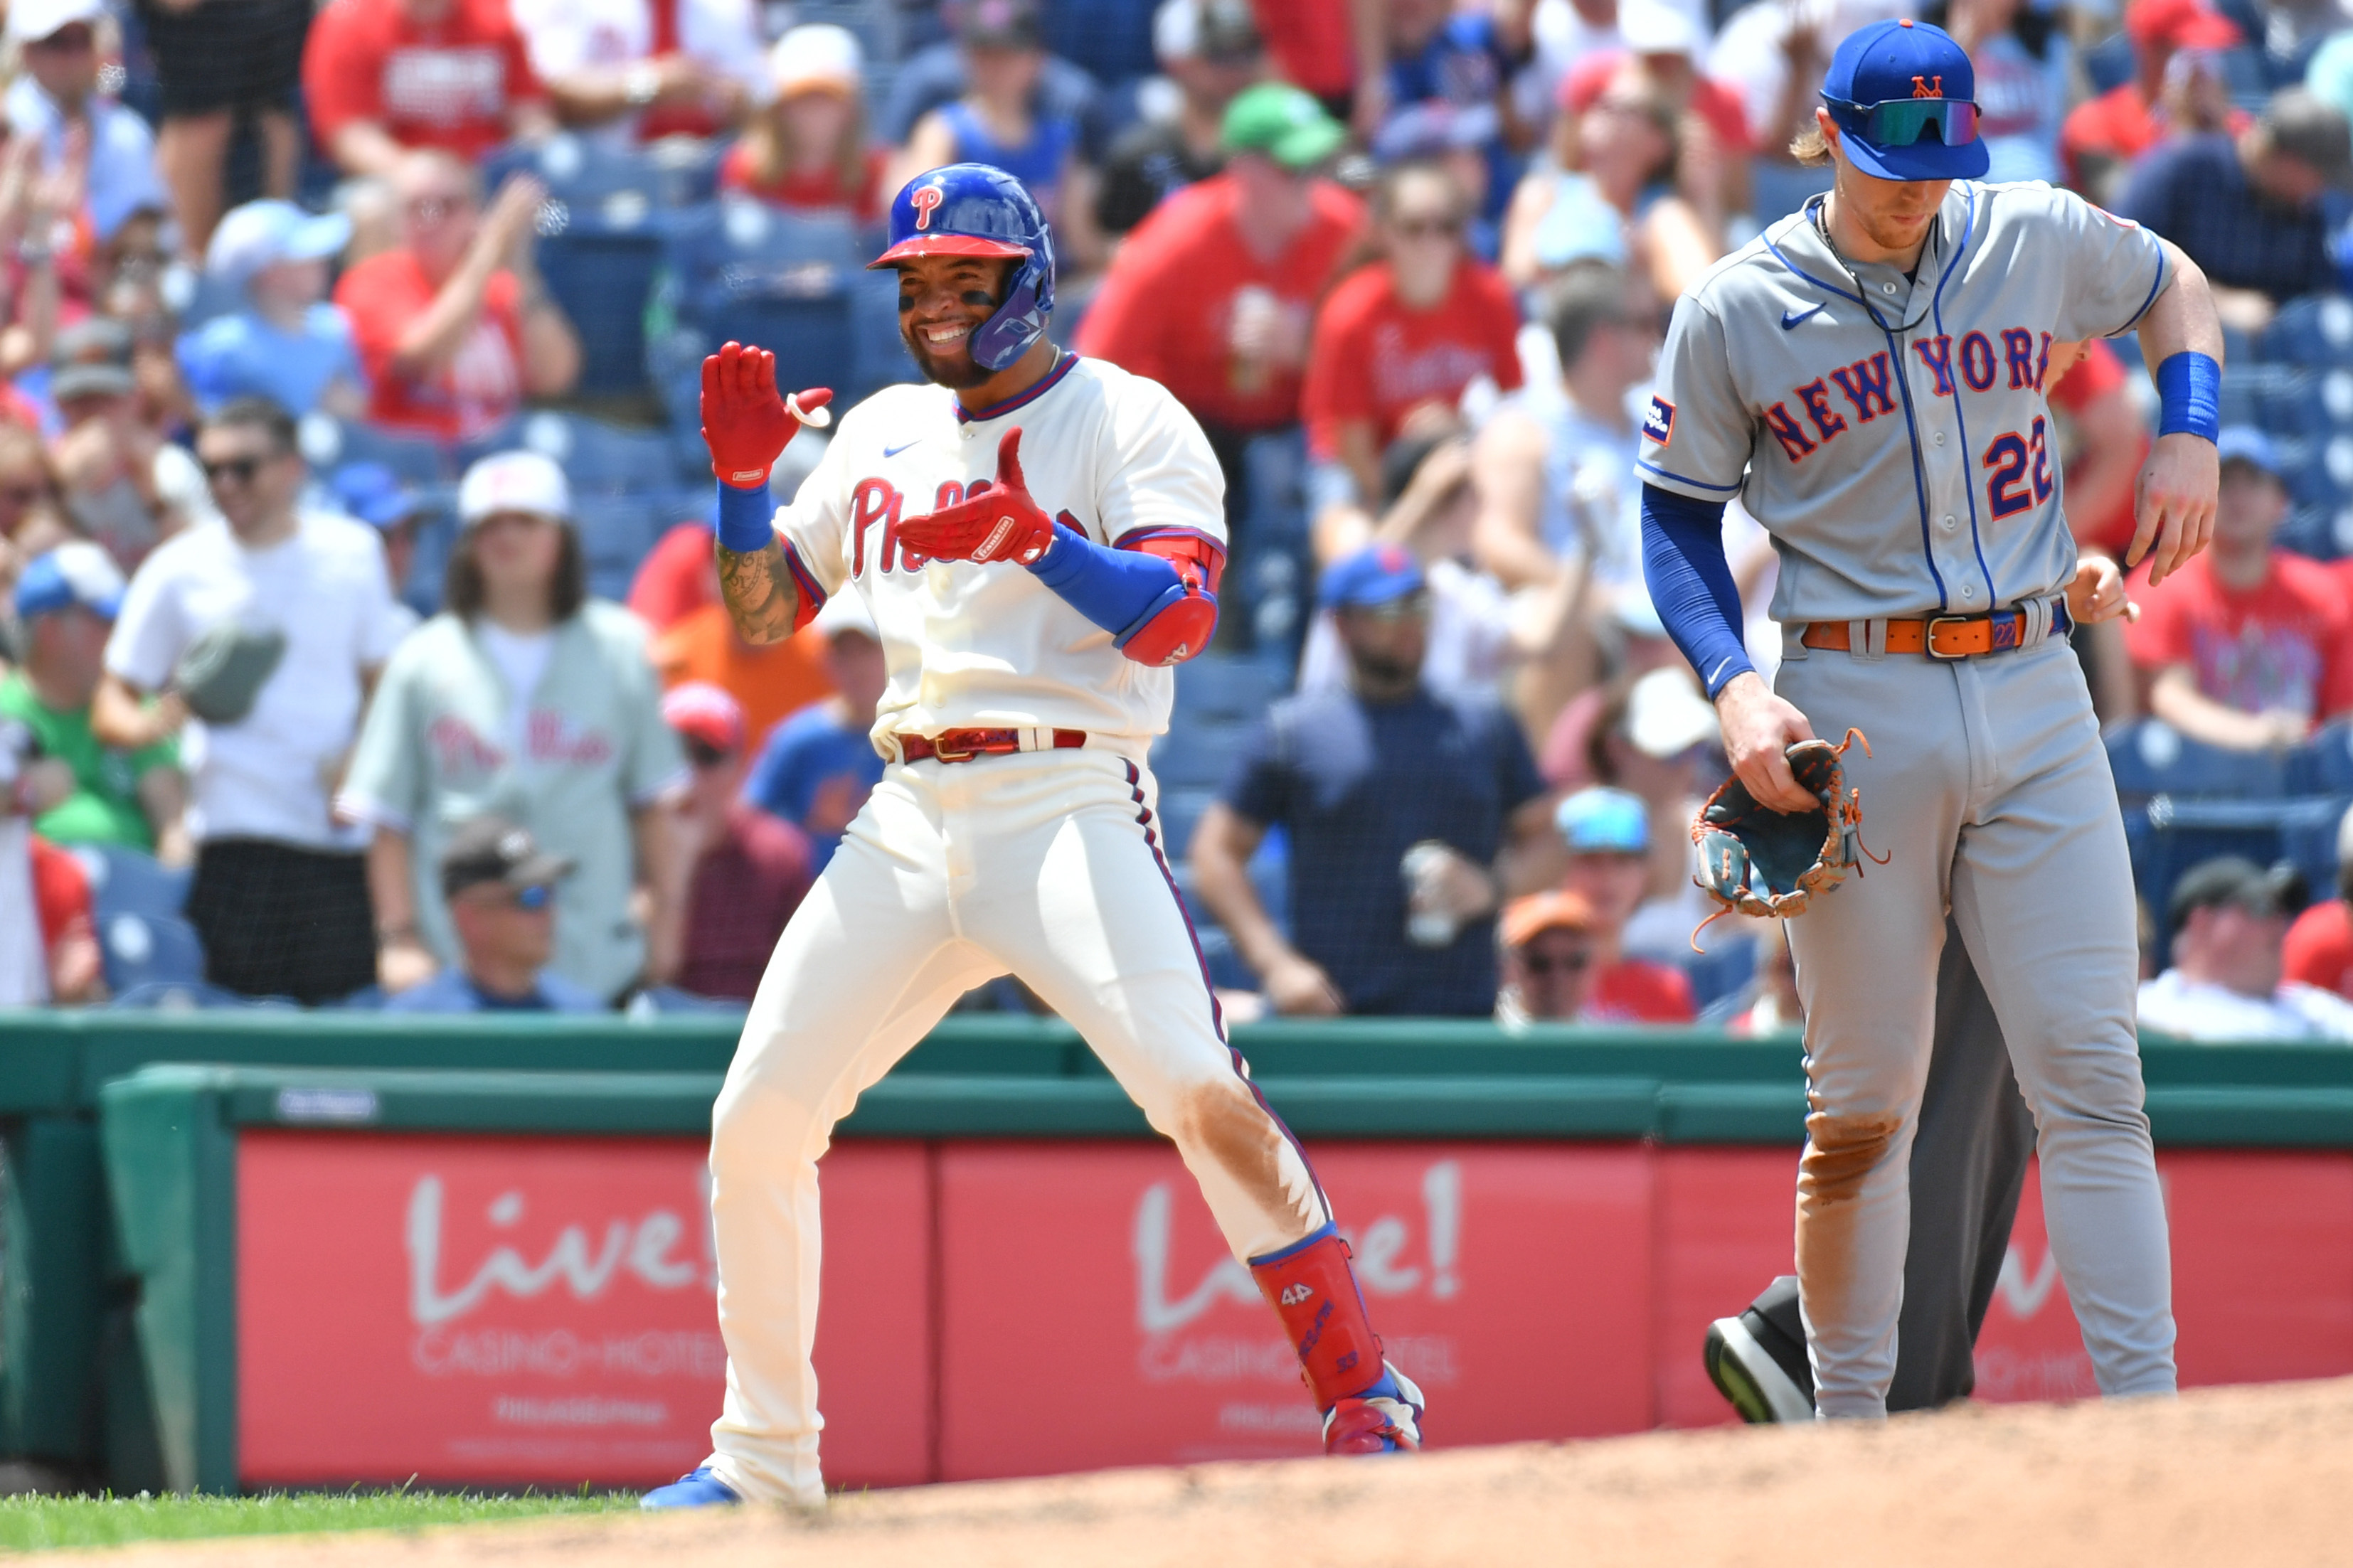 Phillies Avoid Mets Sweep With Eighth Inning Rally - The New York Times